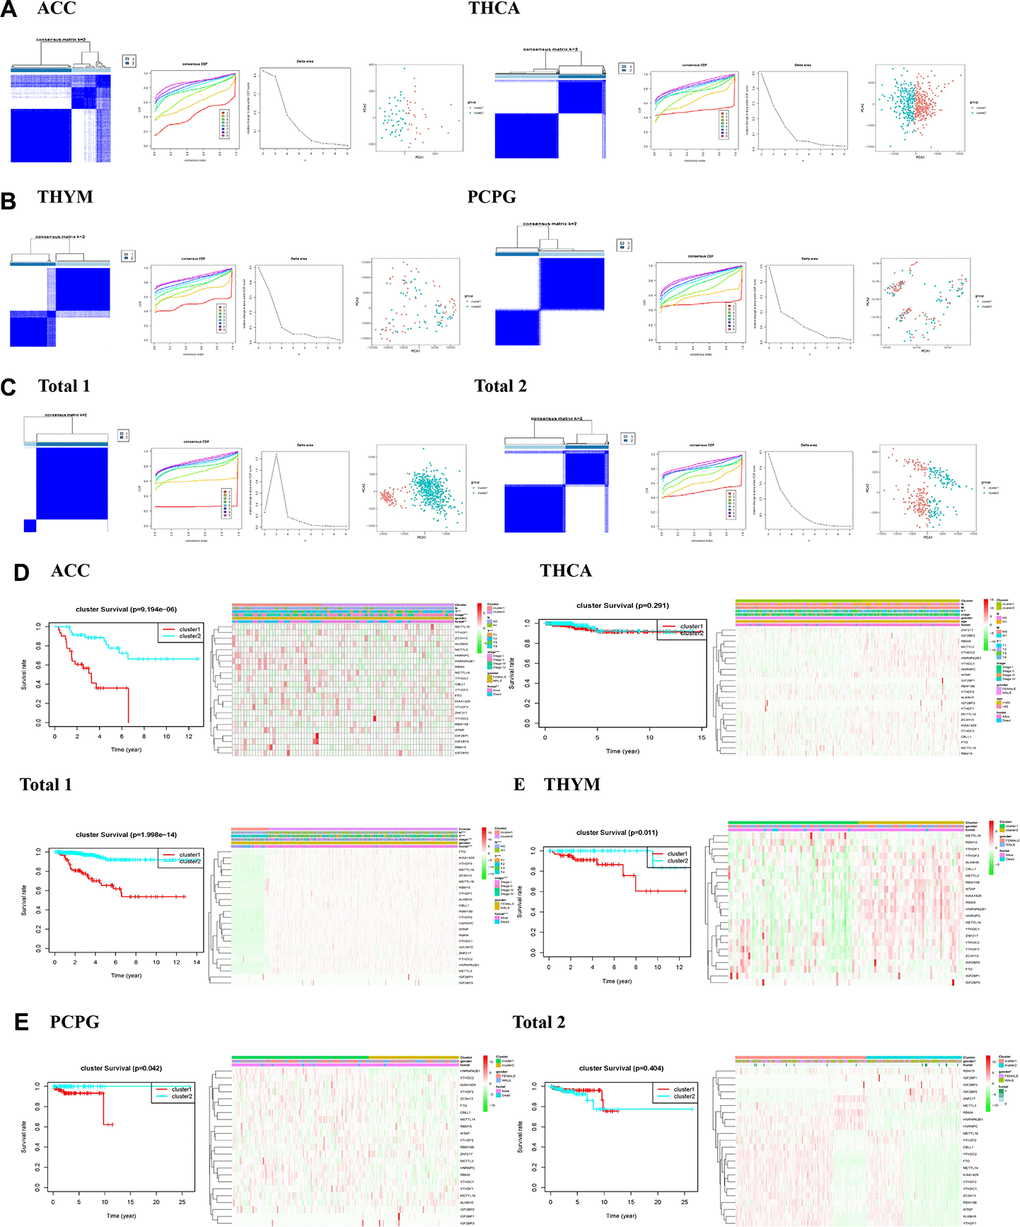 Identification of consensus clusters by m6A RNA methylation regulators in endocrine system tumors. (A–C) Consensus clustering matrix for k = 2, and consensus clustering cumulative distribution function (CDF) for k = 2 to 9, and relative change in area under CDF curve for k = 2–9, and principal component analysis (PCA) of total RNA expression profiles in tumors data from the cancer genome atlas (TCGA) dataset; (D, E) Heatmaps, and Kaplan–Meier overall survival (OS) curve and clinicopathologic features of two clusters defined by consistent expression of the m6A regulatory genes (clusters1/2).